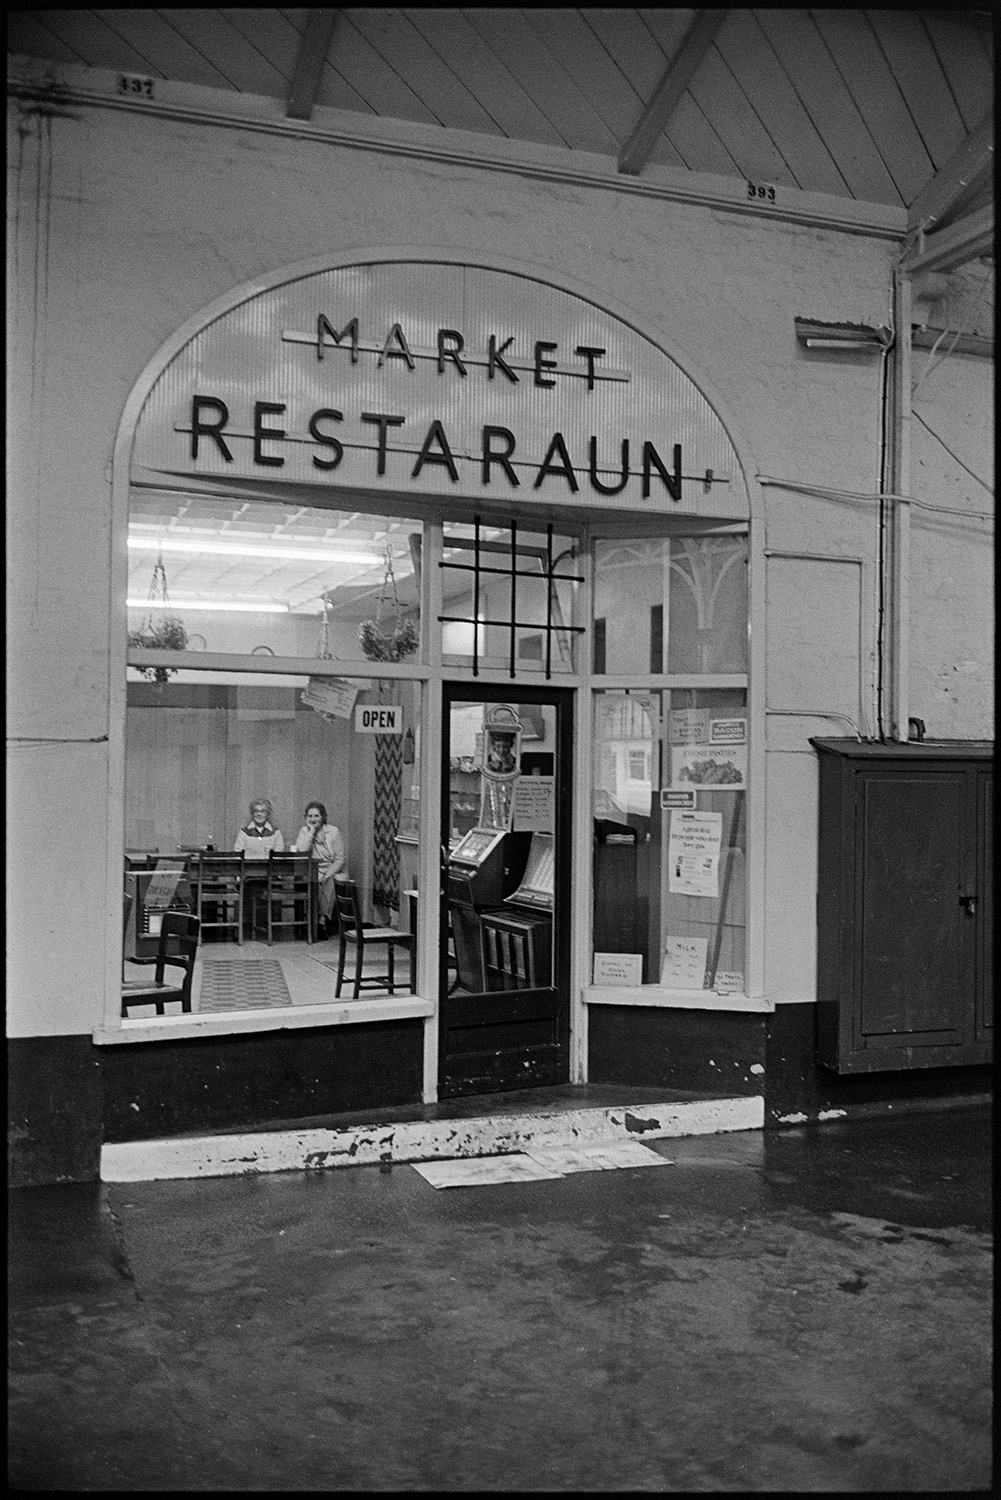 Restaurant in pannier market, front of. 
[The front of the 'Market Restaurant' in Barnstaple Pannier Market. Two people can be seen sitting inside.]